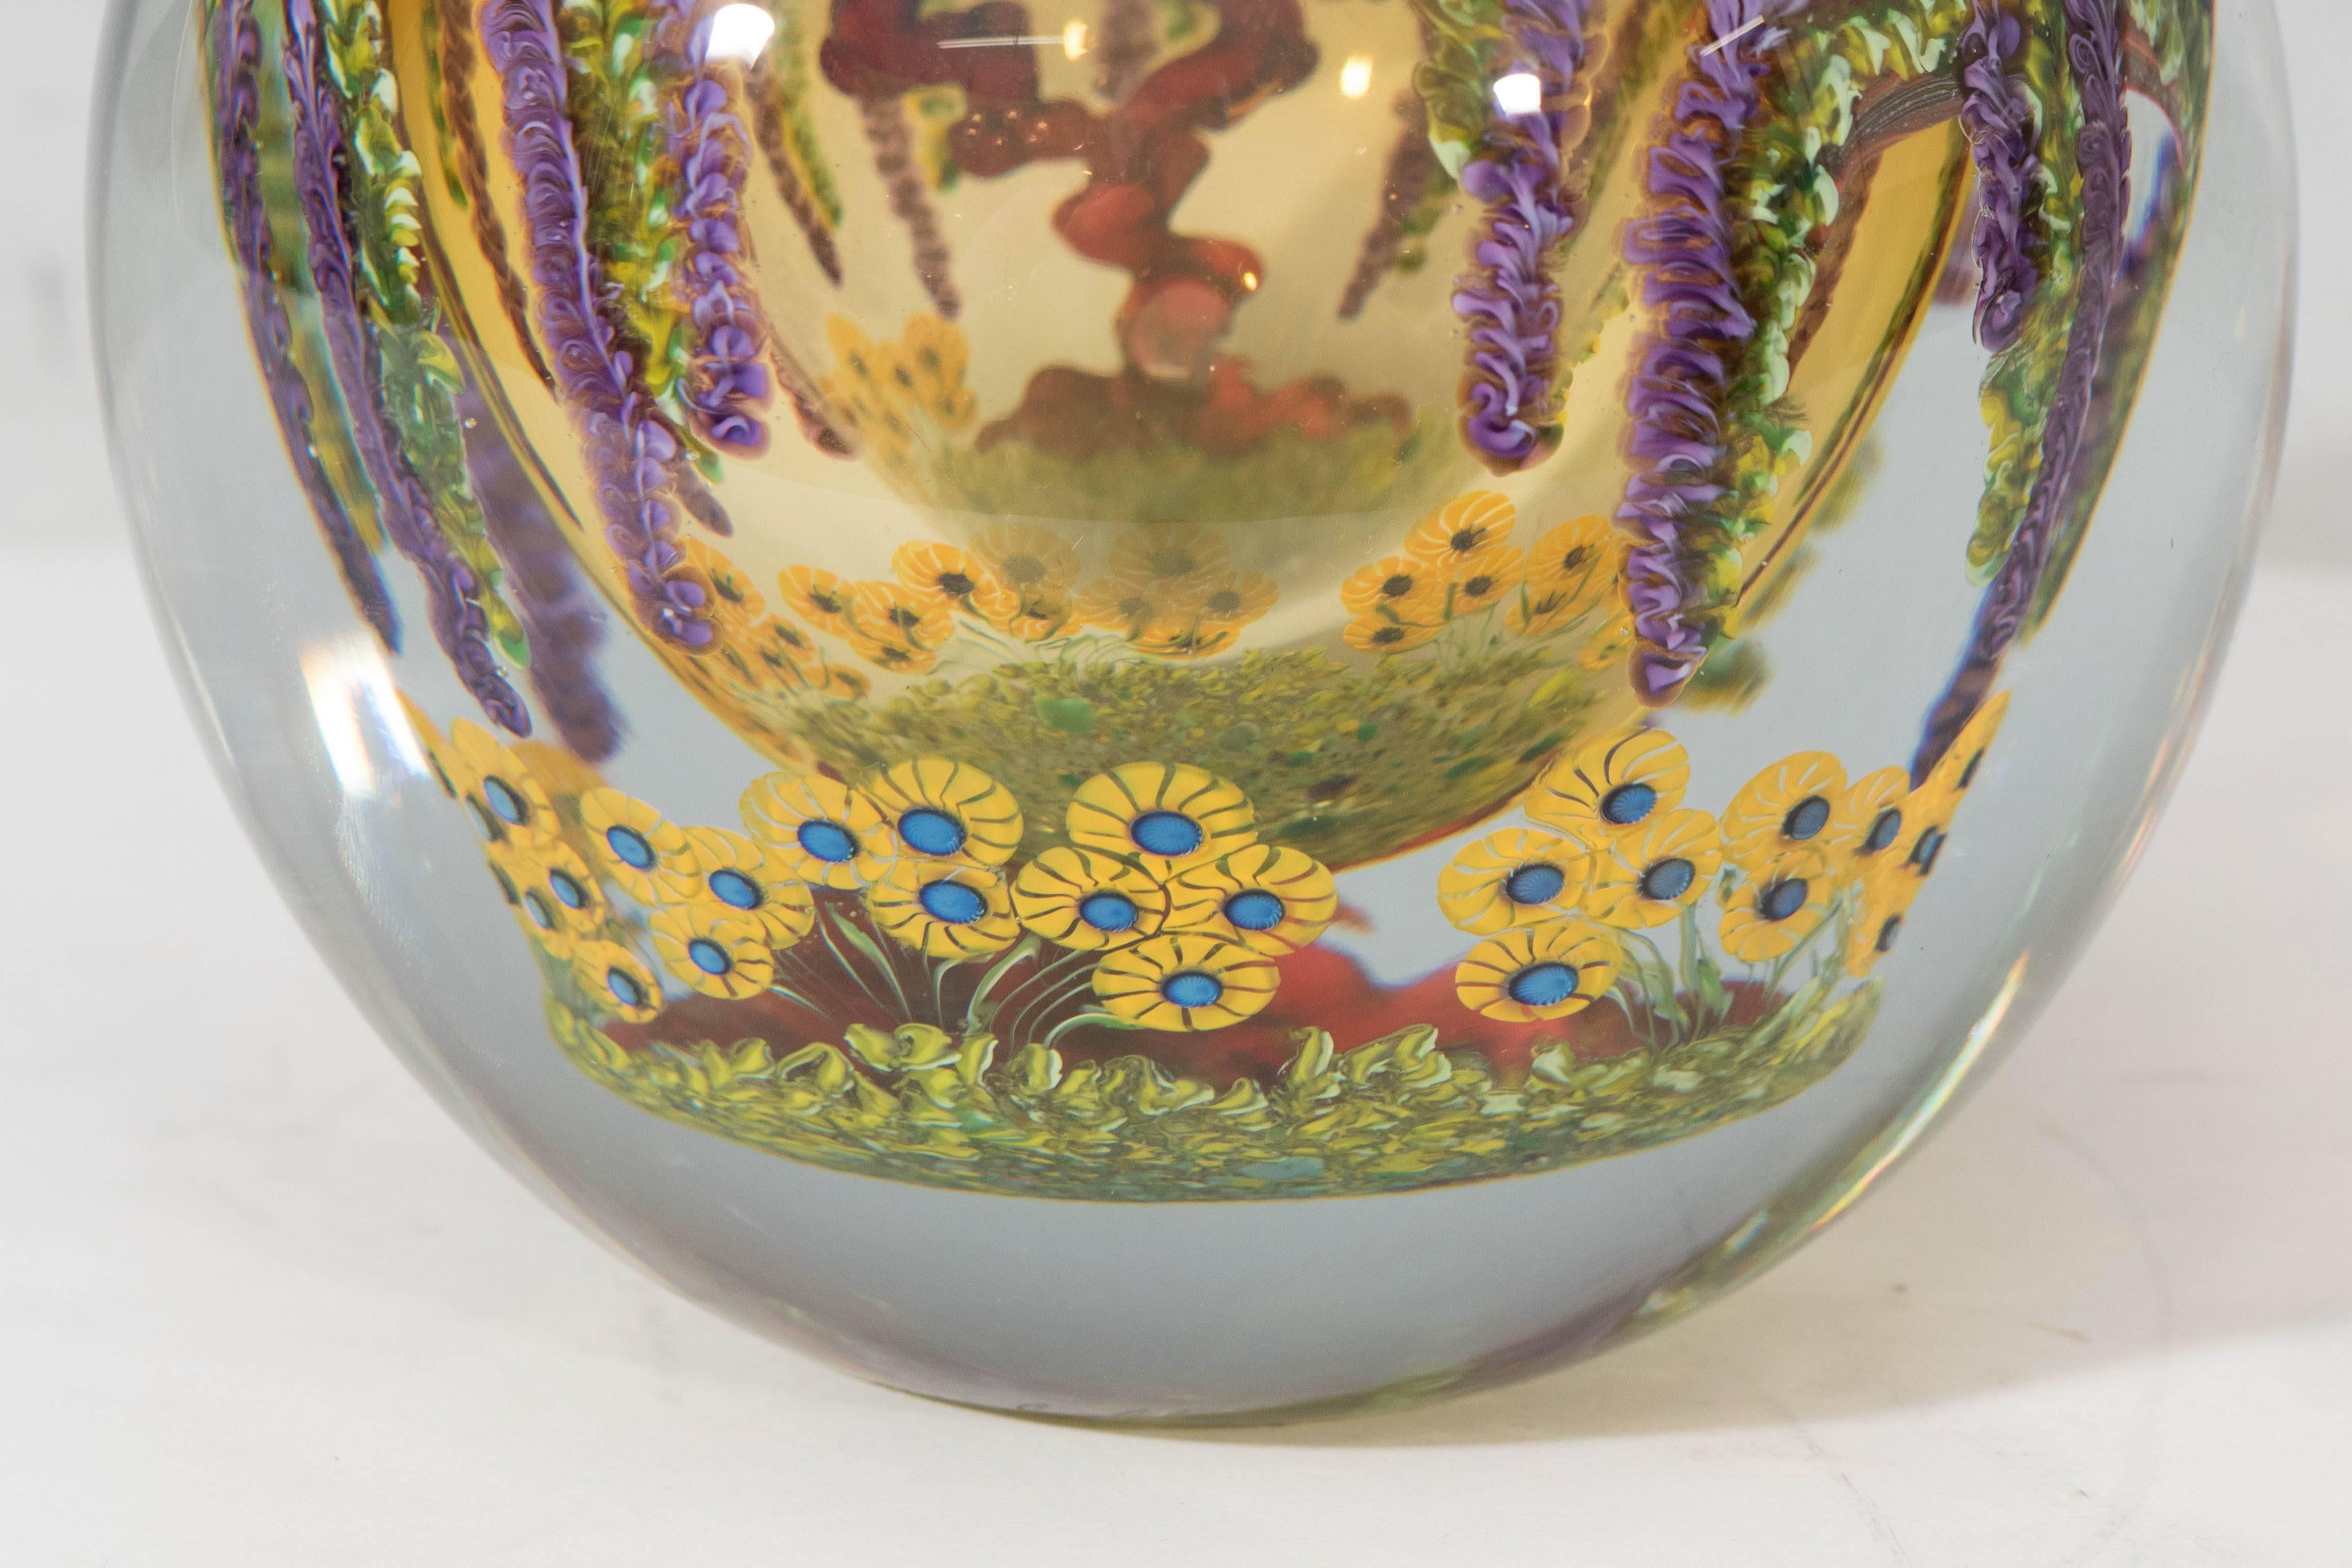 A handblown glass vase, created in 1997 by artist Chris Heilman, composed of intricate compound layers, clear over warm amber, detailed with hanging wisteria and twisting branches, above beds of bright yellow flowers. Markings include [Chris